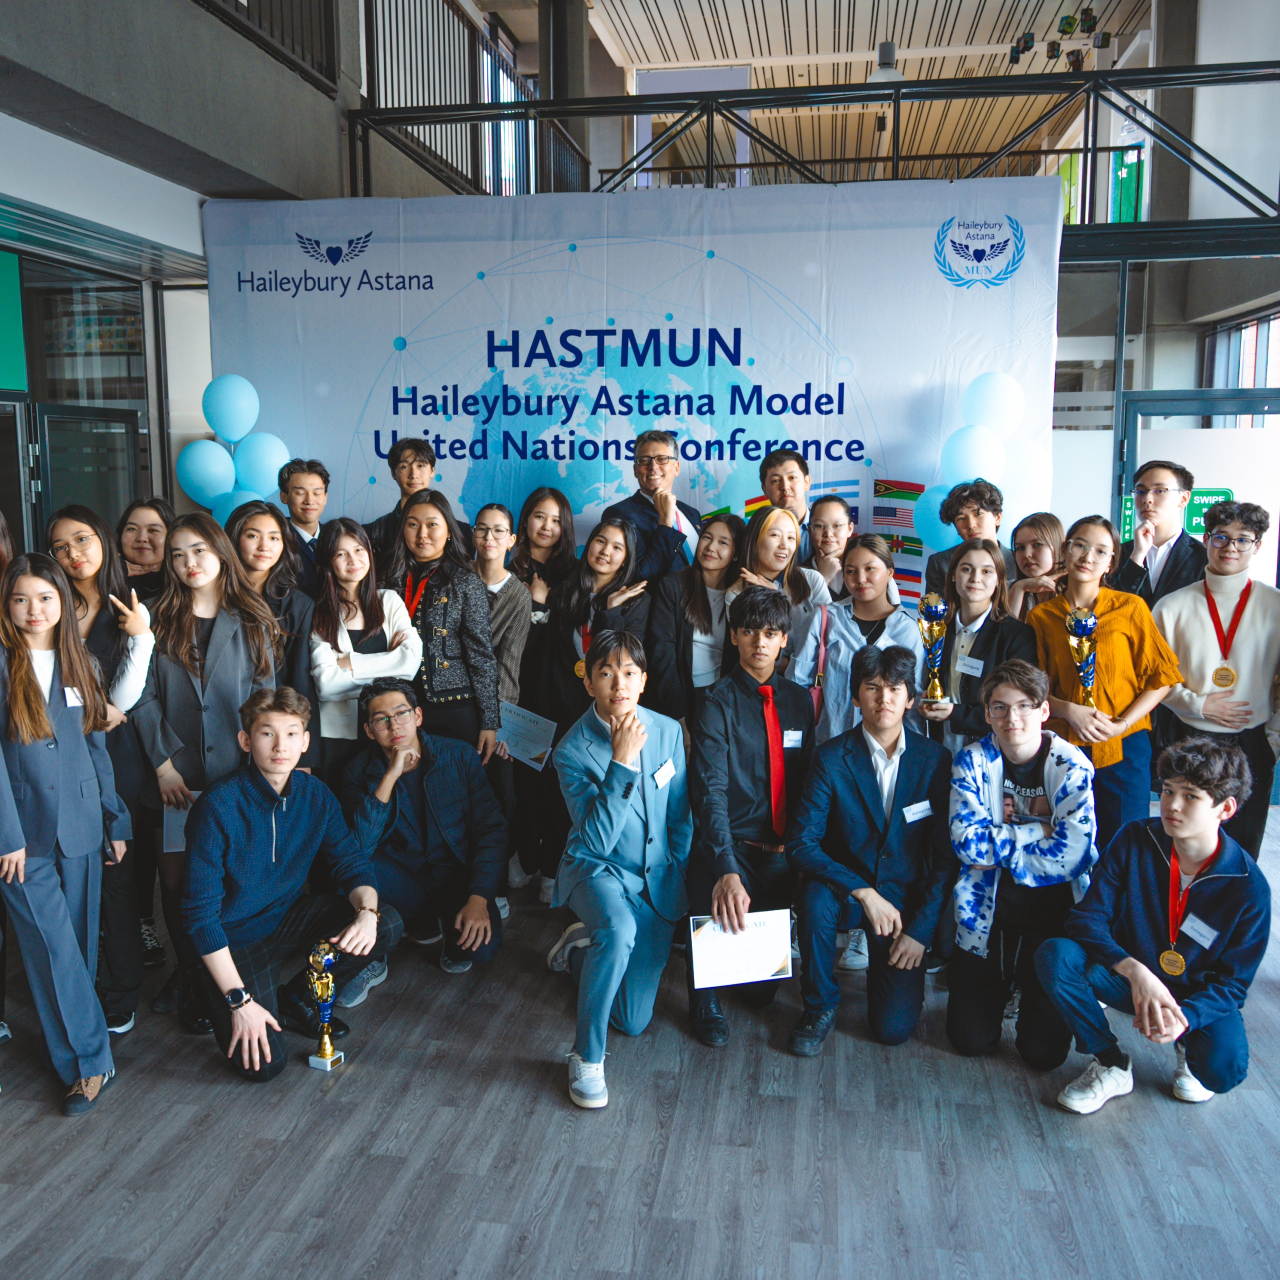 Haileybury Astana Hosts Successful 4th Annual HASTMUN Conference